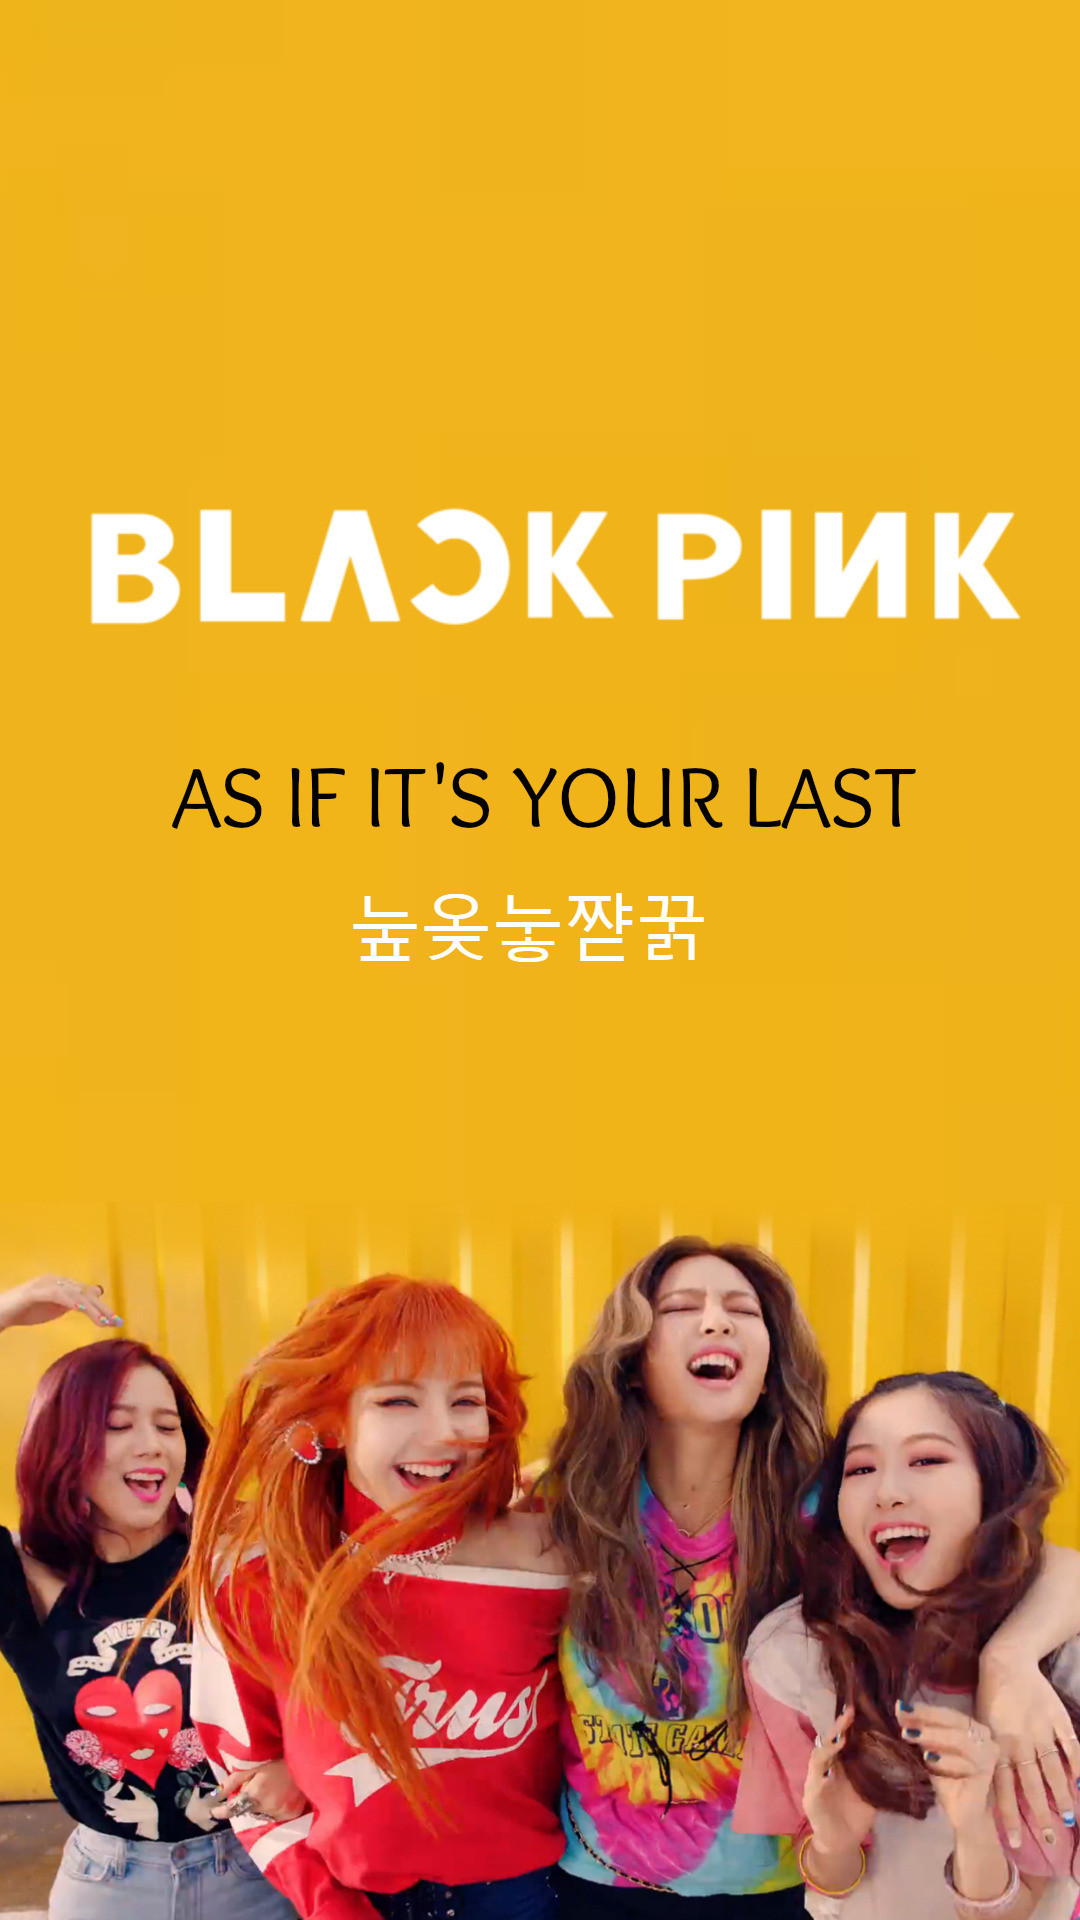 1080x1920 Tagged: #blackpink #blackpink as if its your last #as if its your last #blackpink  wallpaper #blackpink lockscreen #blackpink aesthetic #blackpink background  ...